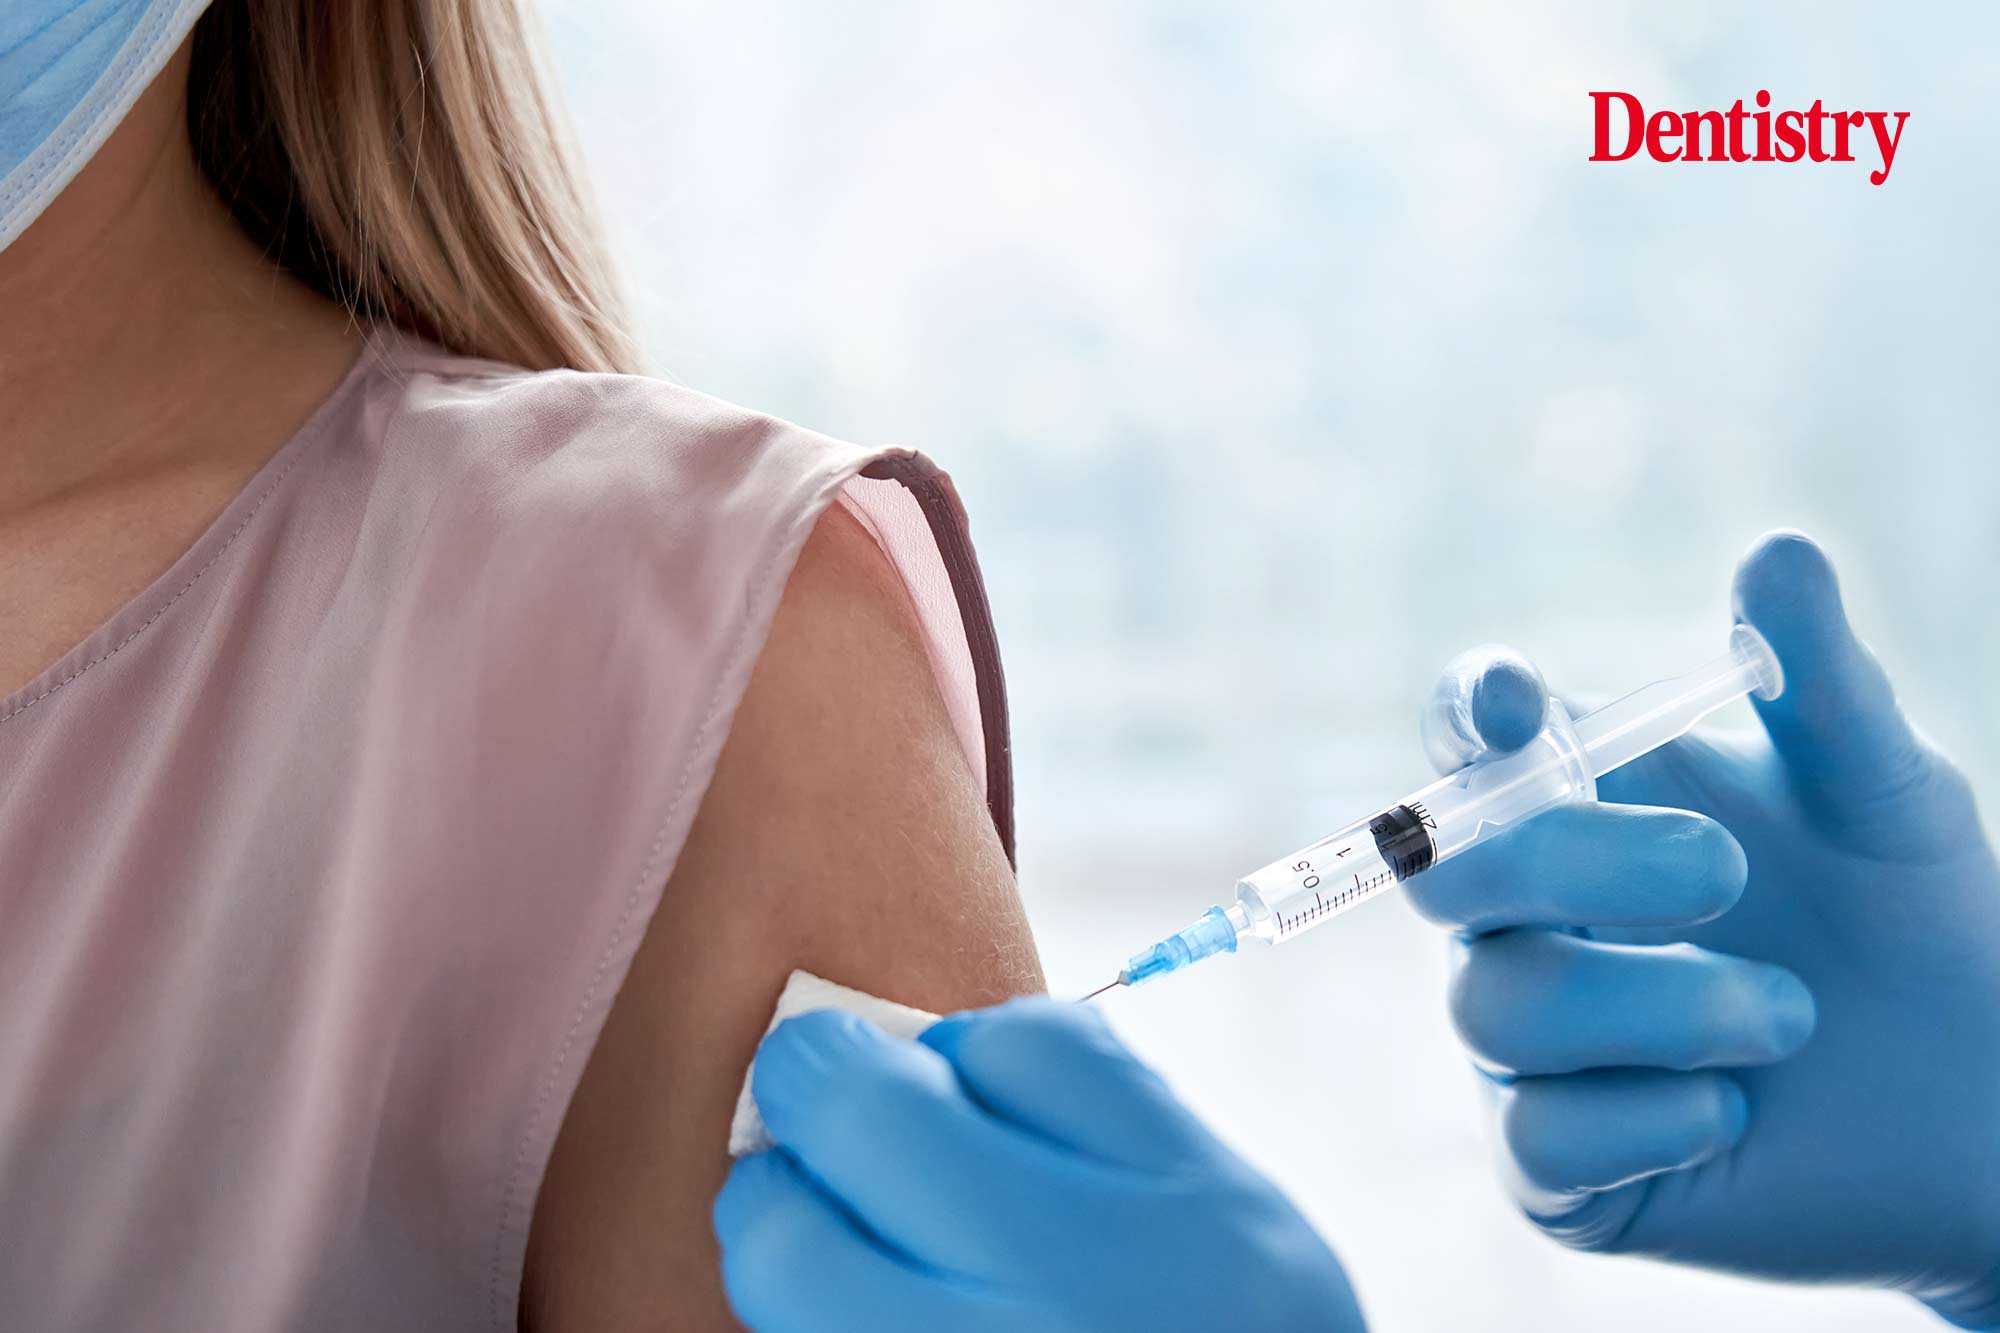 Dental professionals need to have first vaccine dose by February